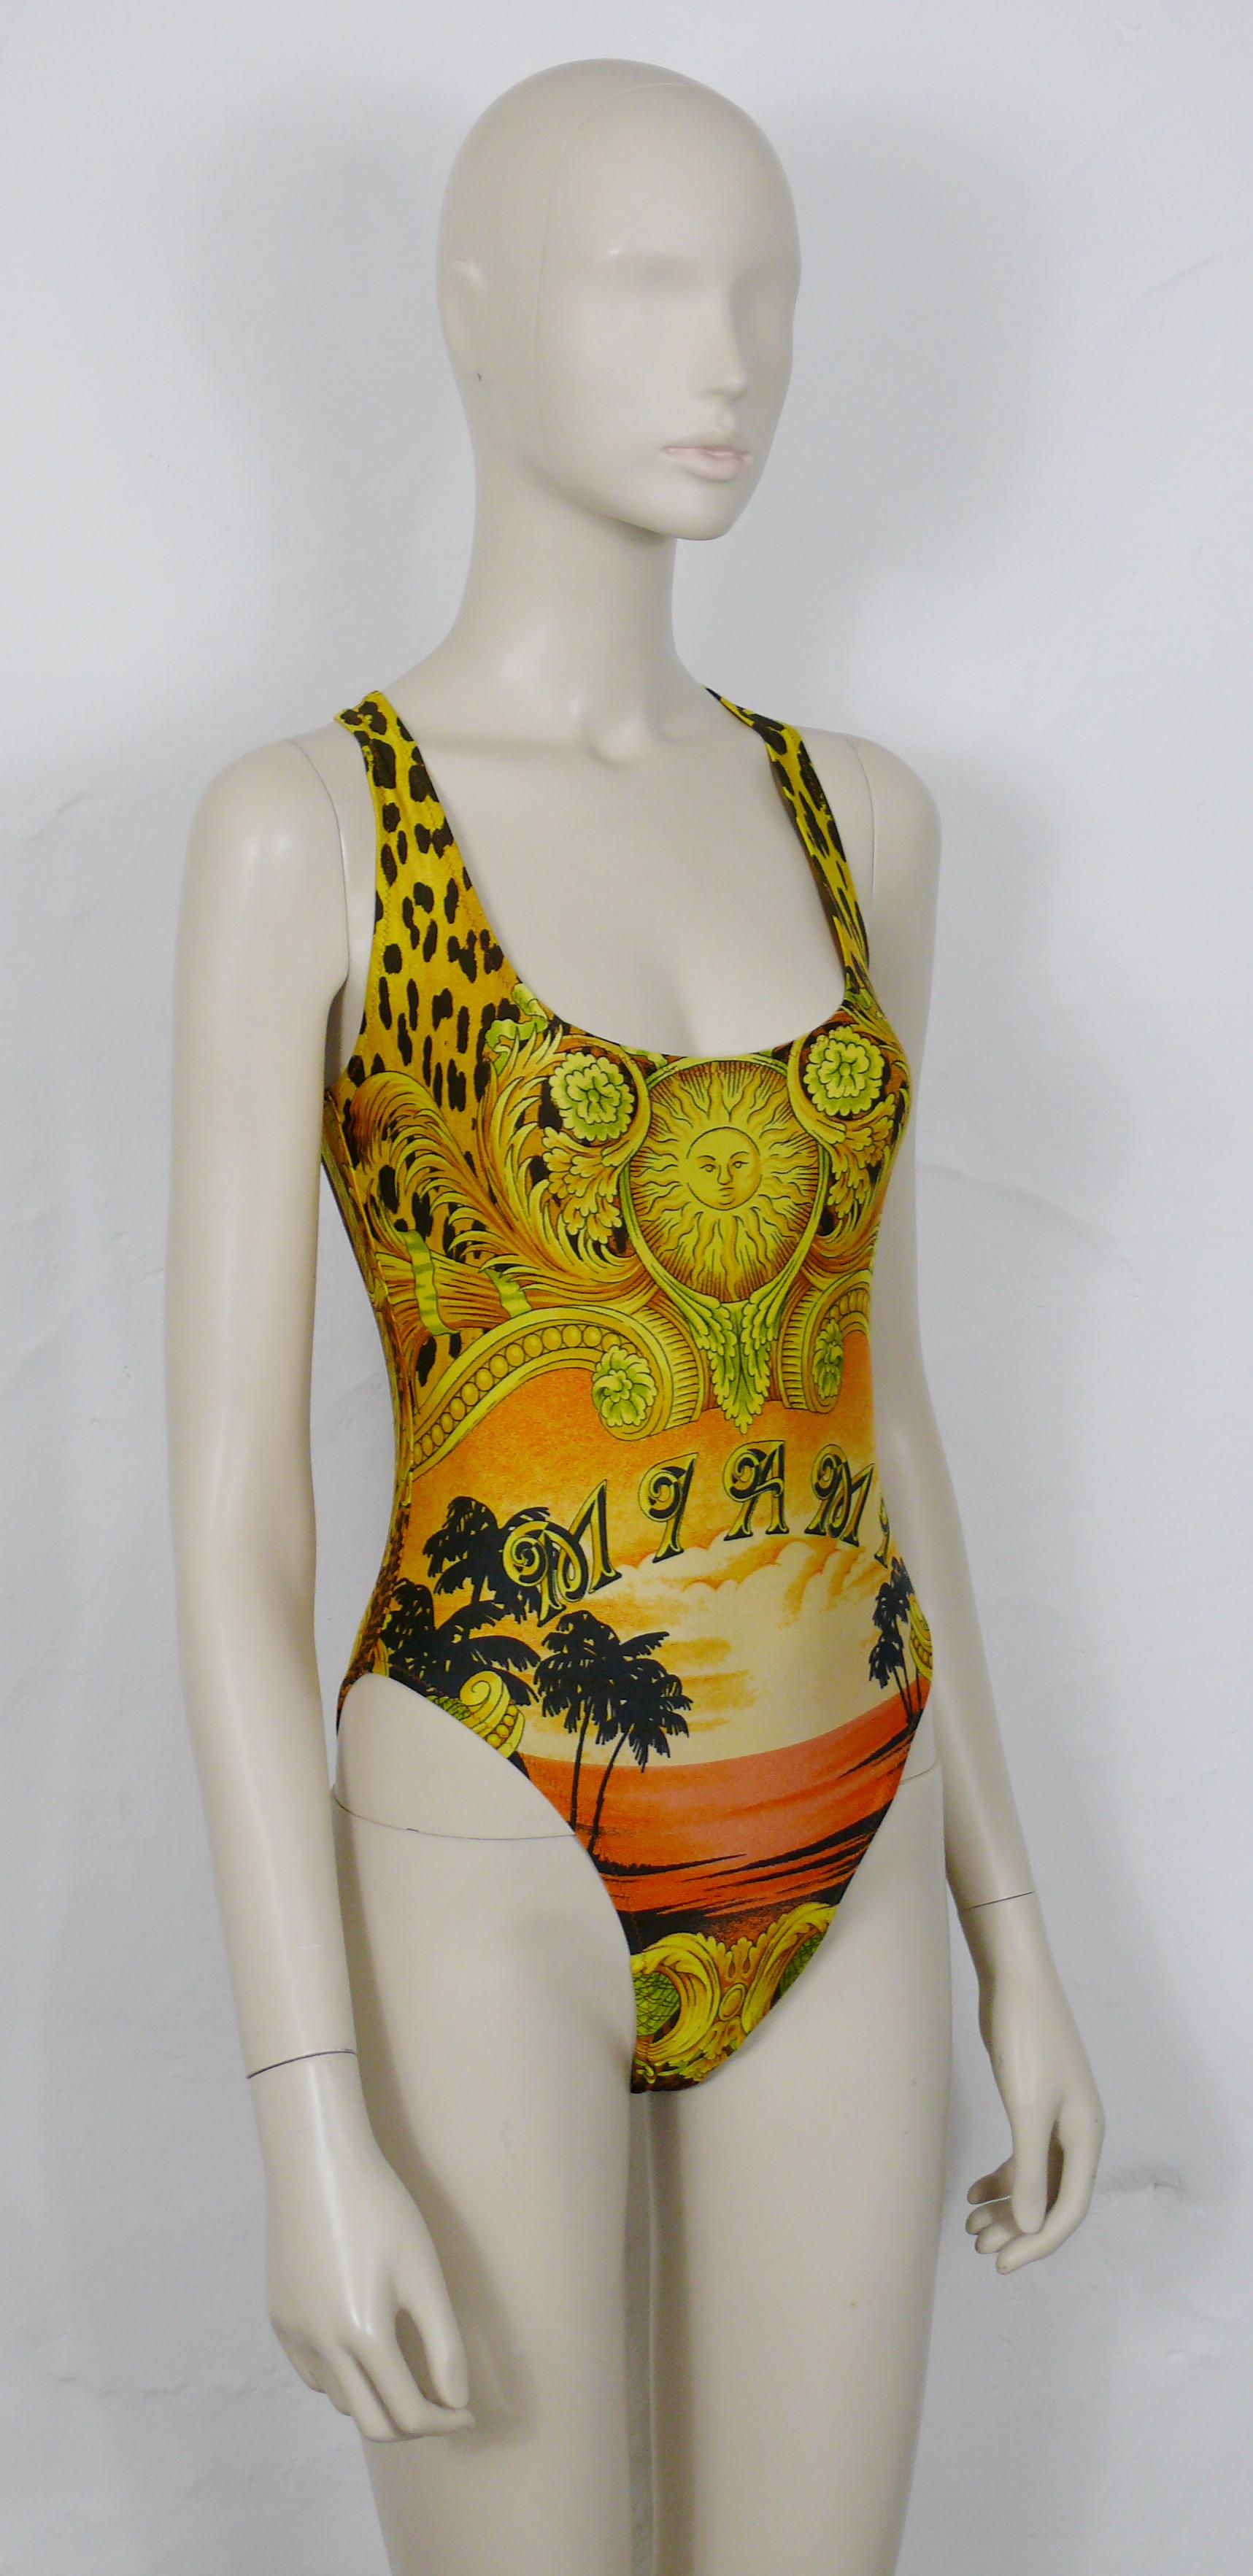 GIANNI VERSACE vintage one-piece backless swimsuit featuring a GIANNI VERSACE signature Barroco print with MIAMI beach sunset palm trees.

Label reads VERSACE MARE Made in Italy.

Size tag reads : 44 (on front) and II (on reverse).
Please refer to